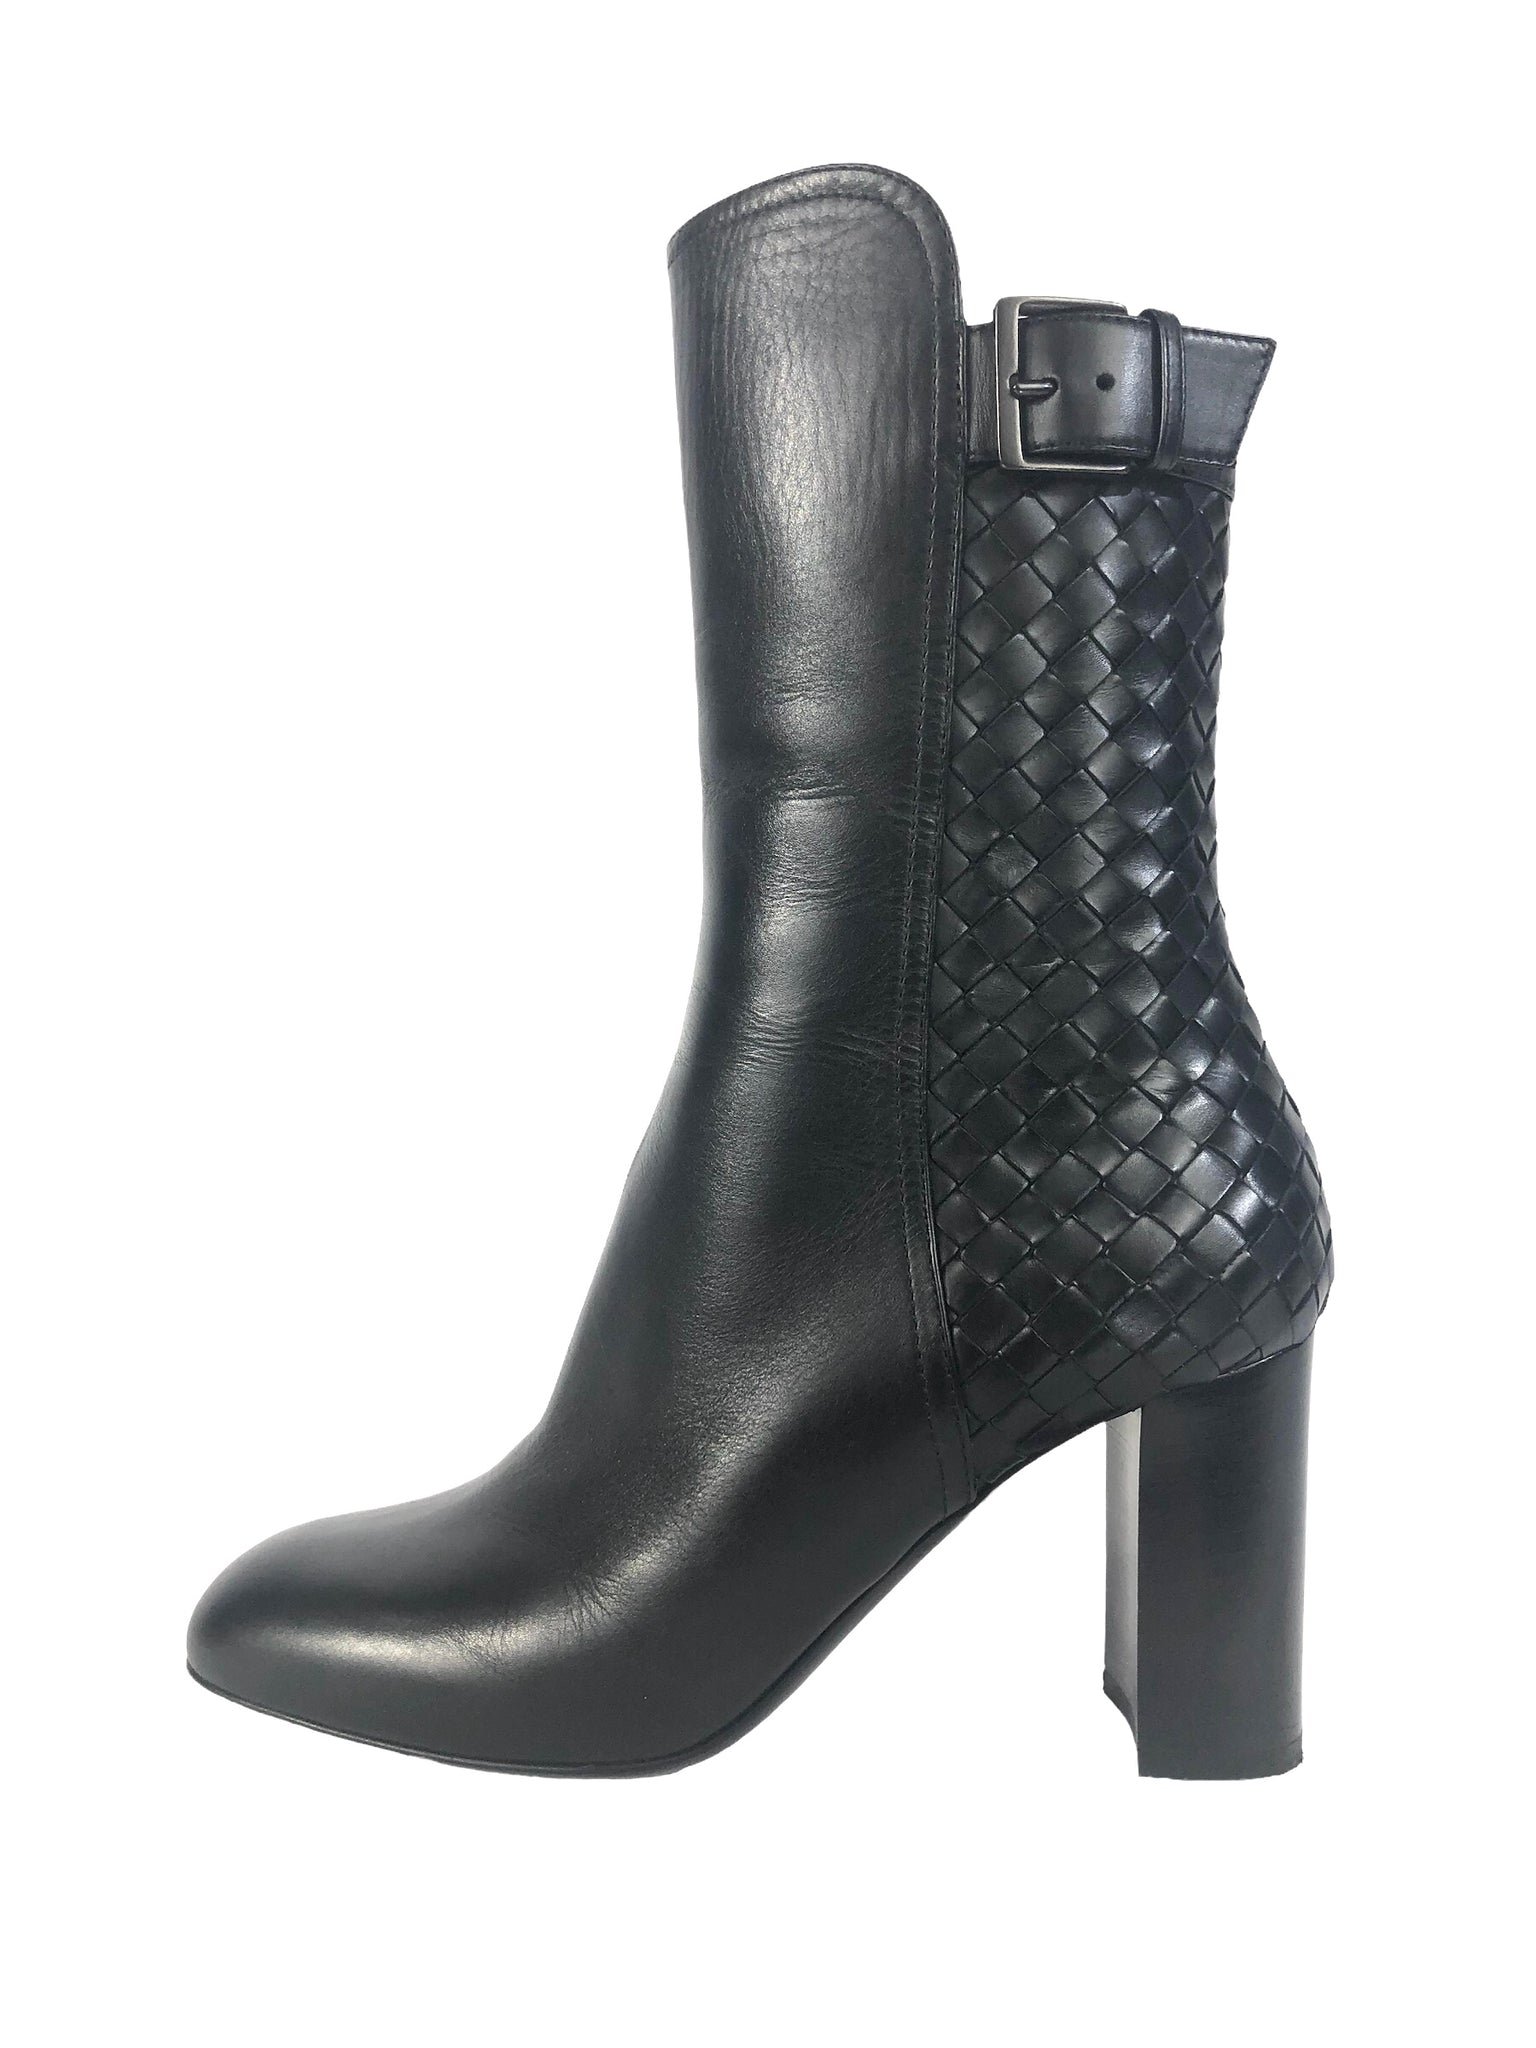 Intrecciato Leather Boots | Size US 8 - IT 38